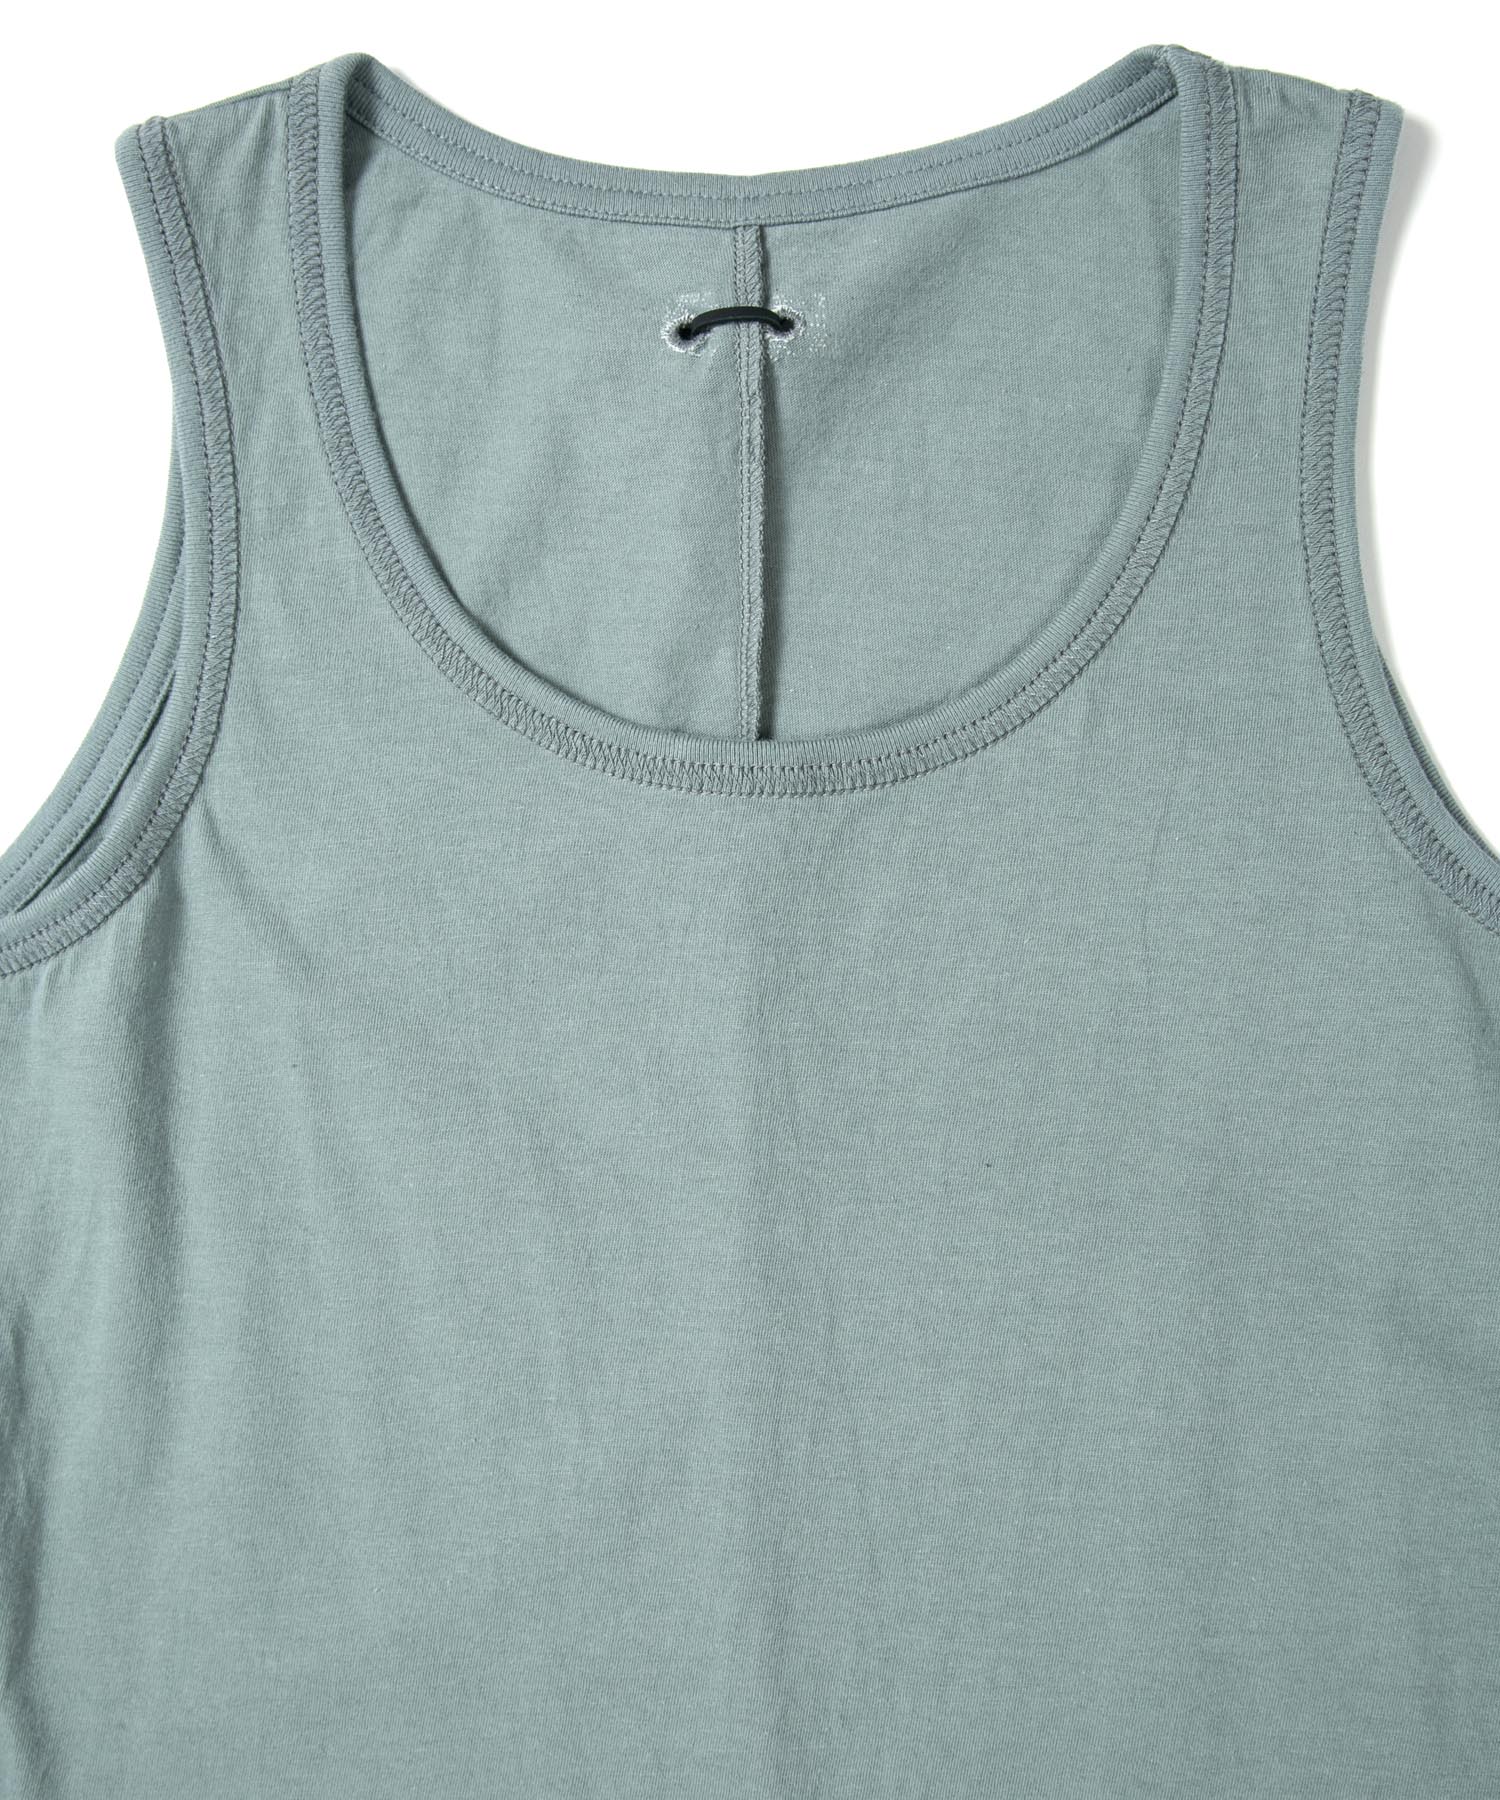 Load image into Gallery viewer, Natural Soft Cotton Tank Top - BLUE GRAY